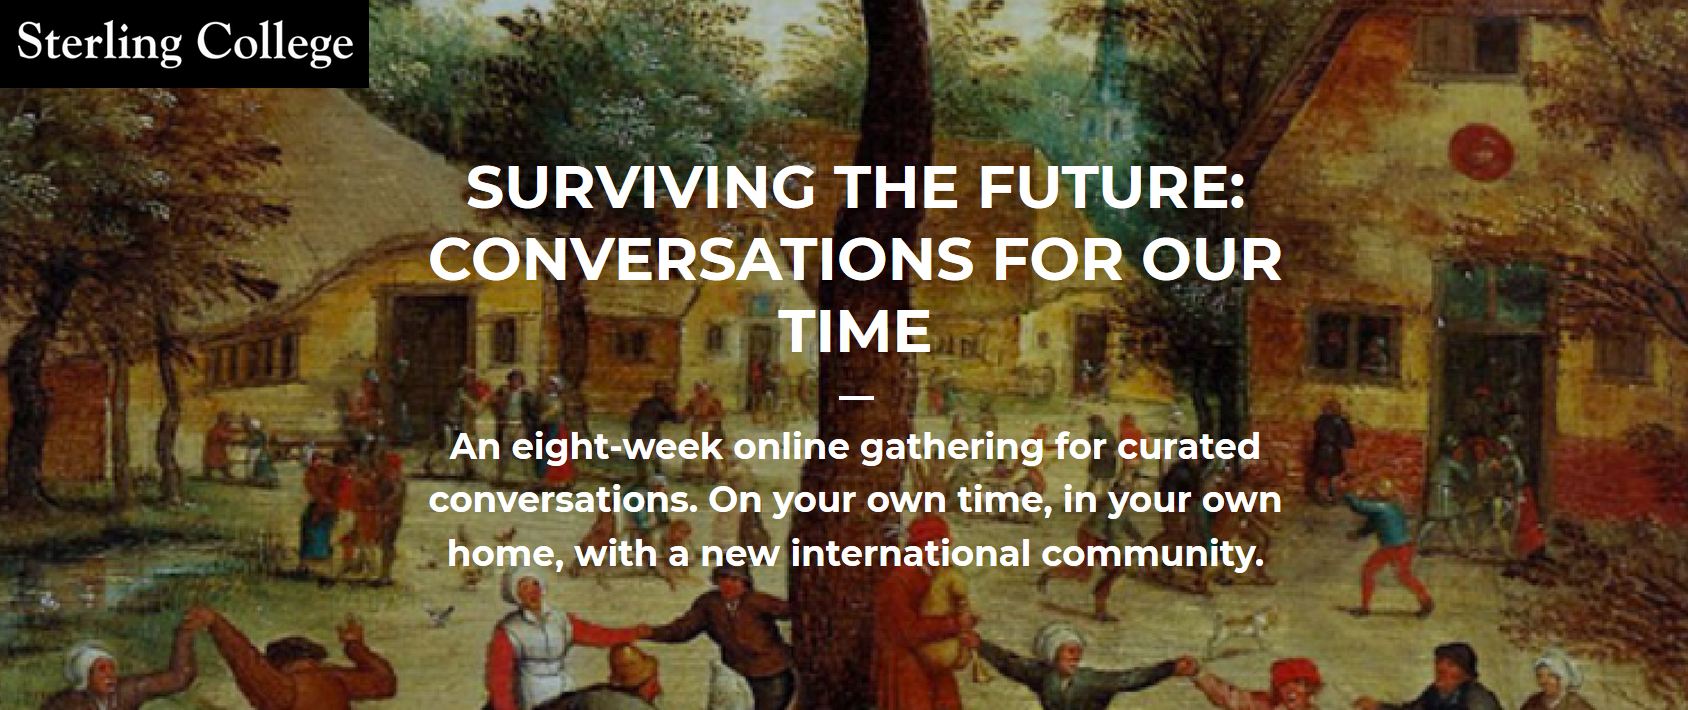 Surviving the Future: Conversations for Our Time